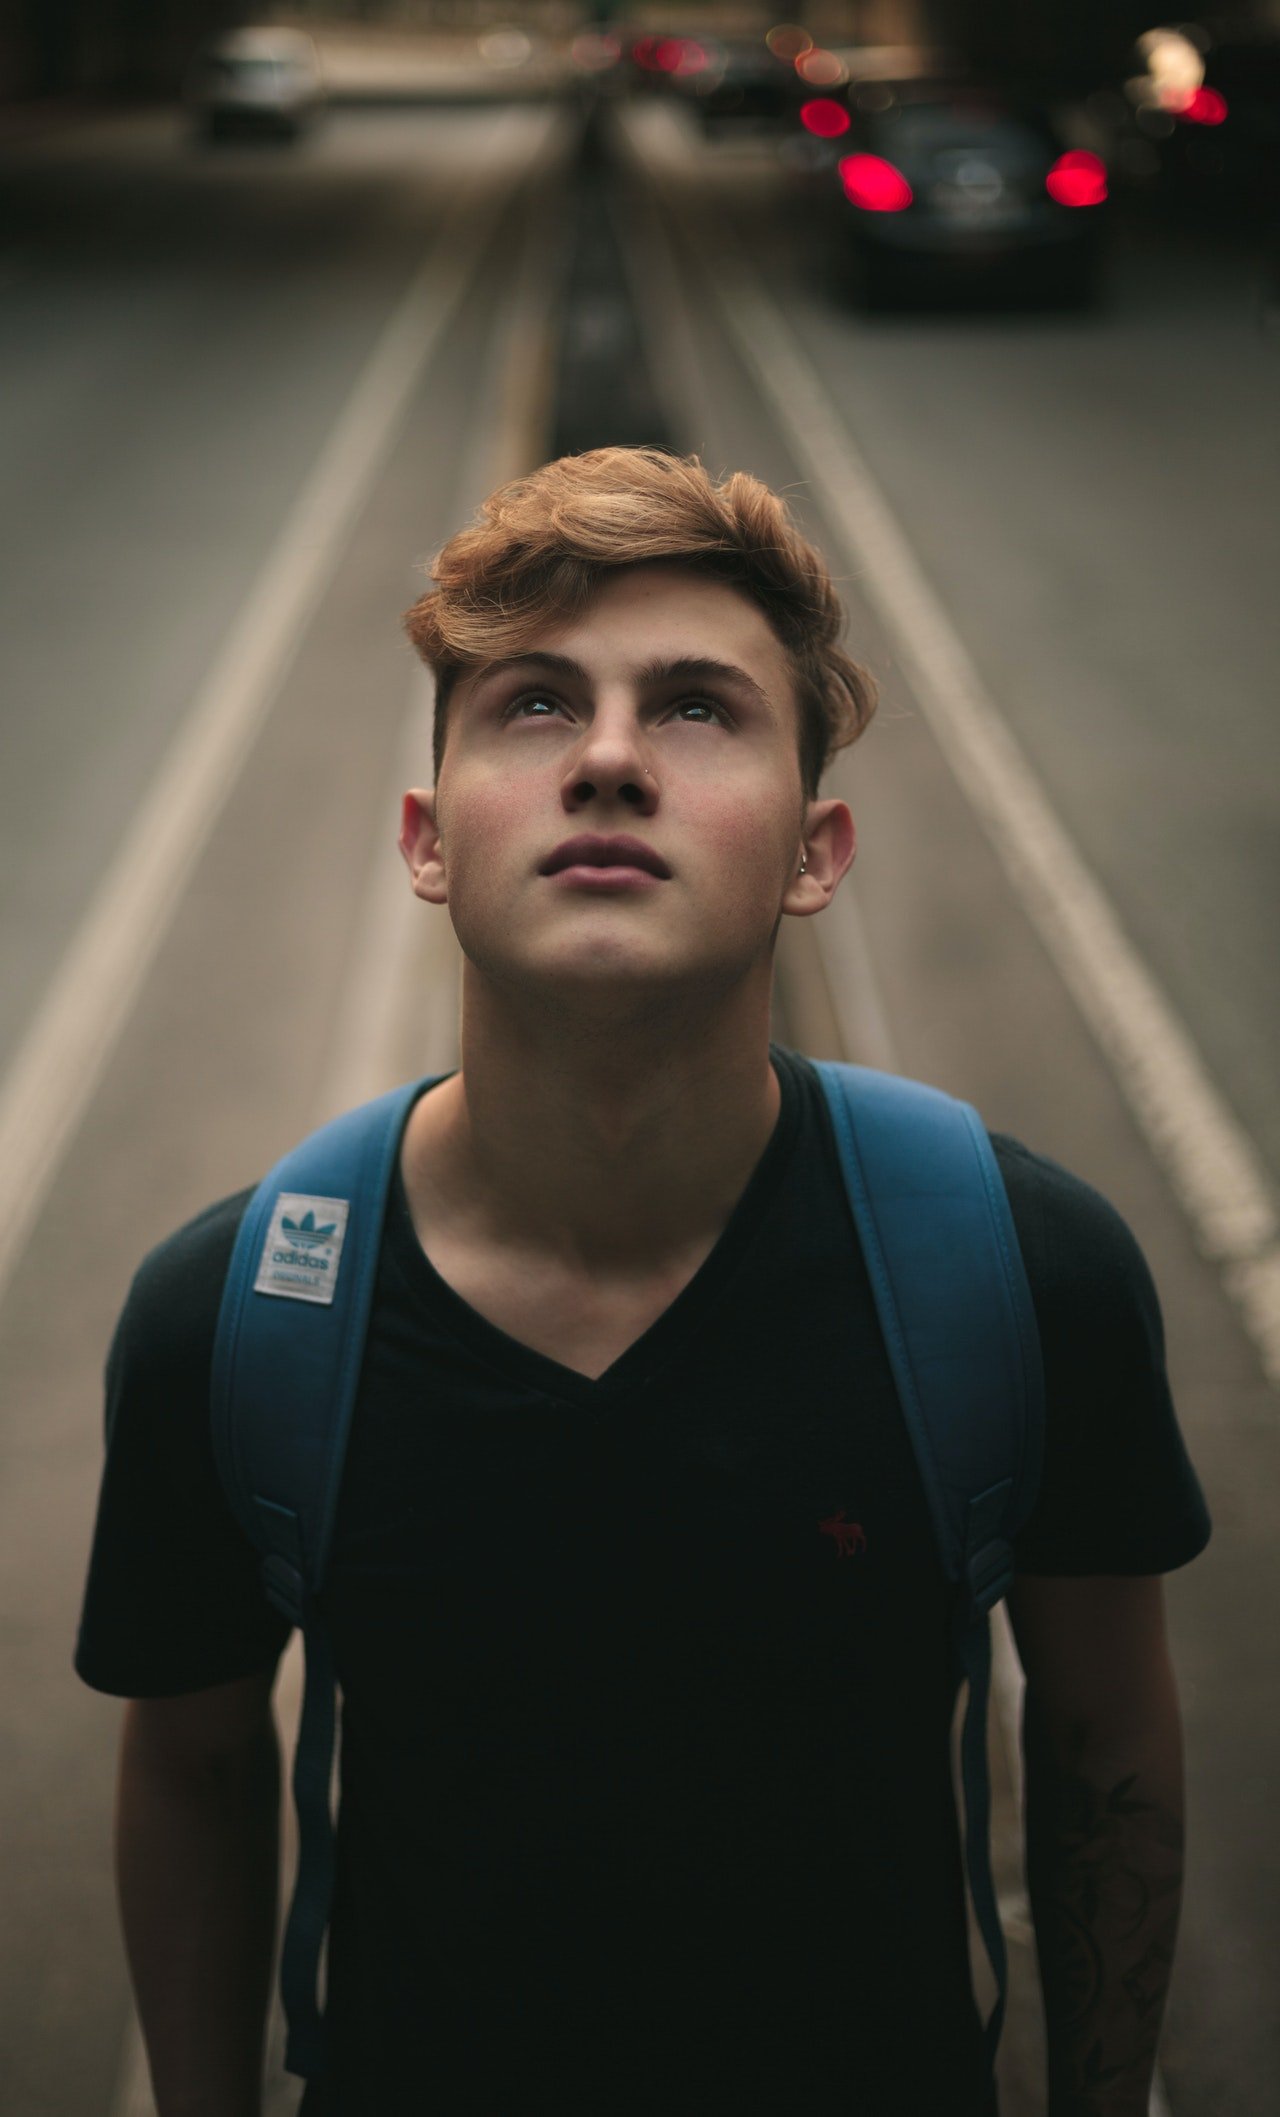 Photo of a young teenager | Photo: Pexels